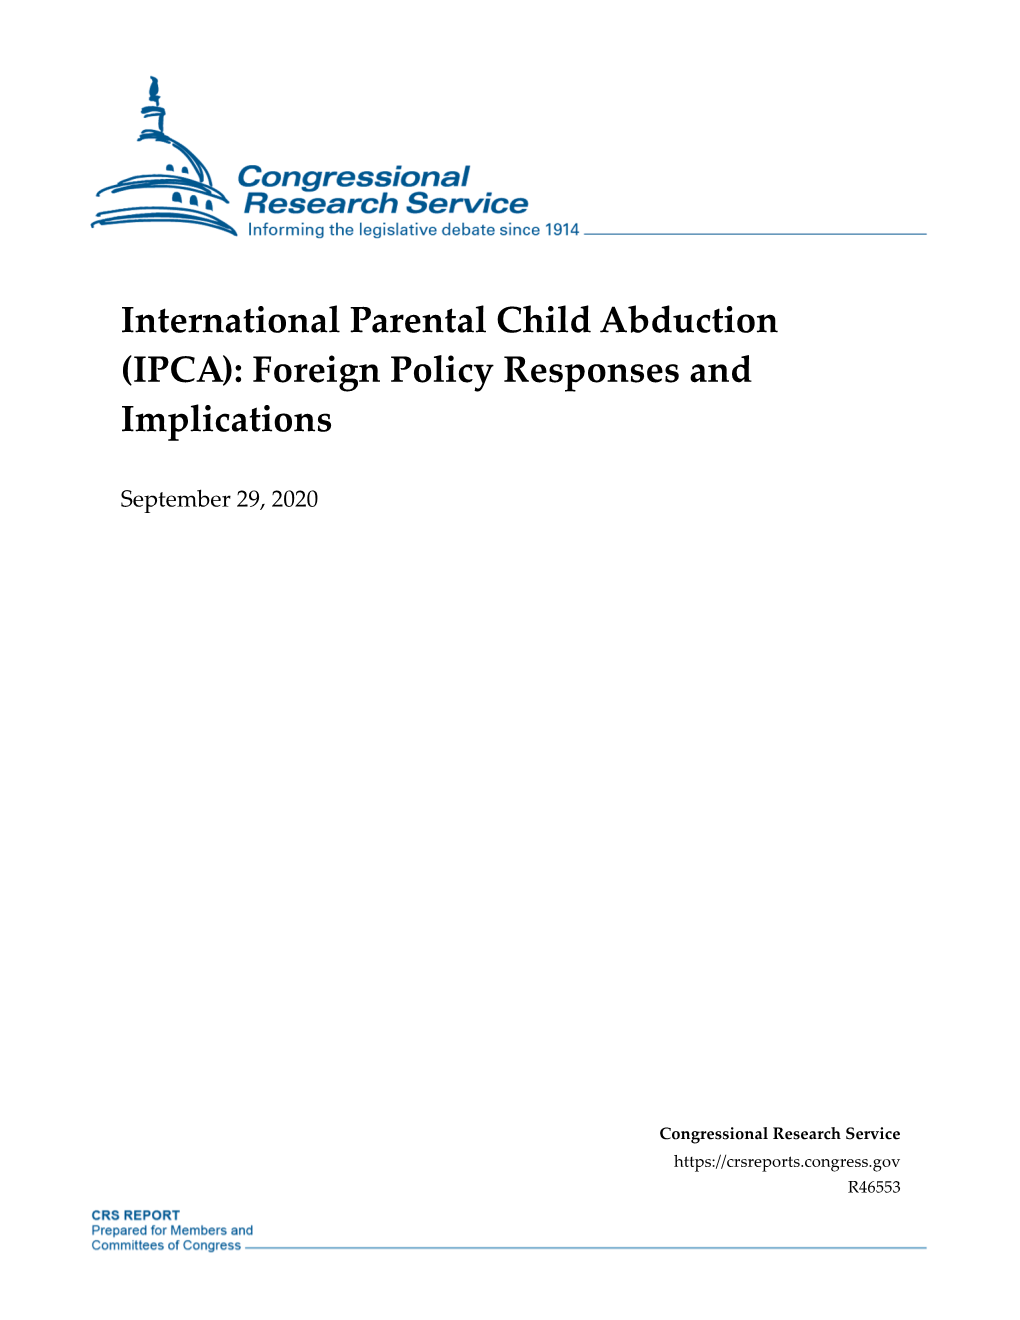 International Parental Child Abduction (IPCA): Foreign Policy Responses and Implications